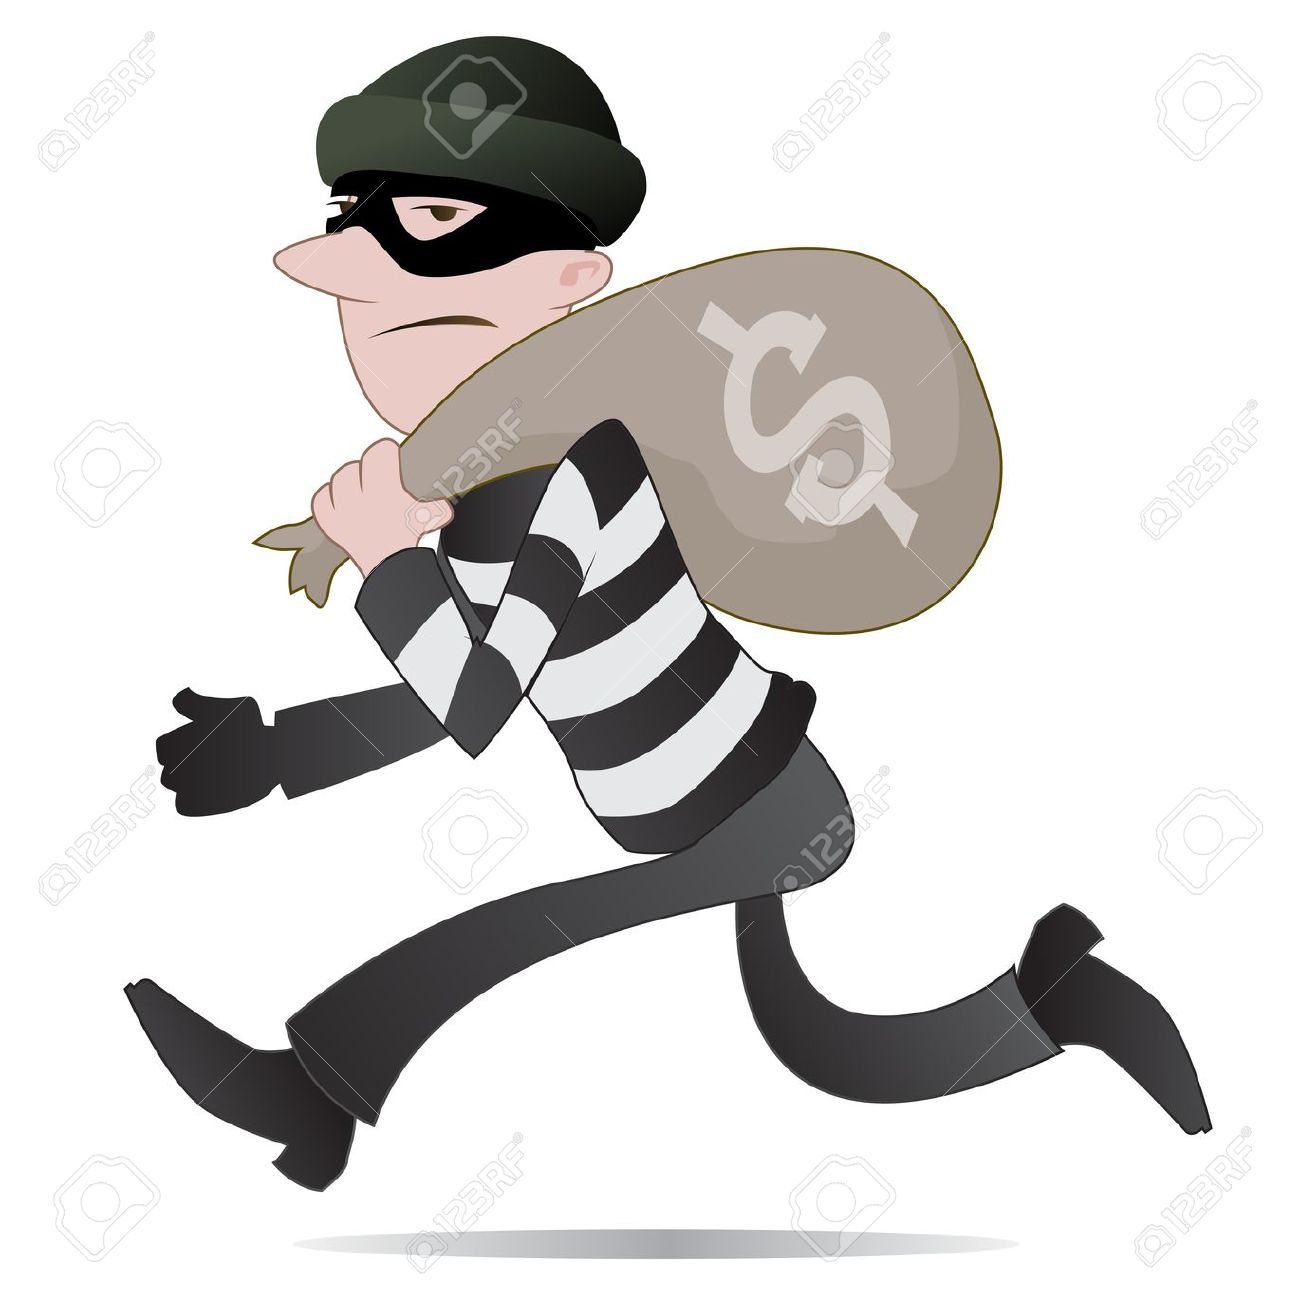 mask robber: Thief